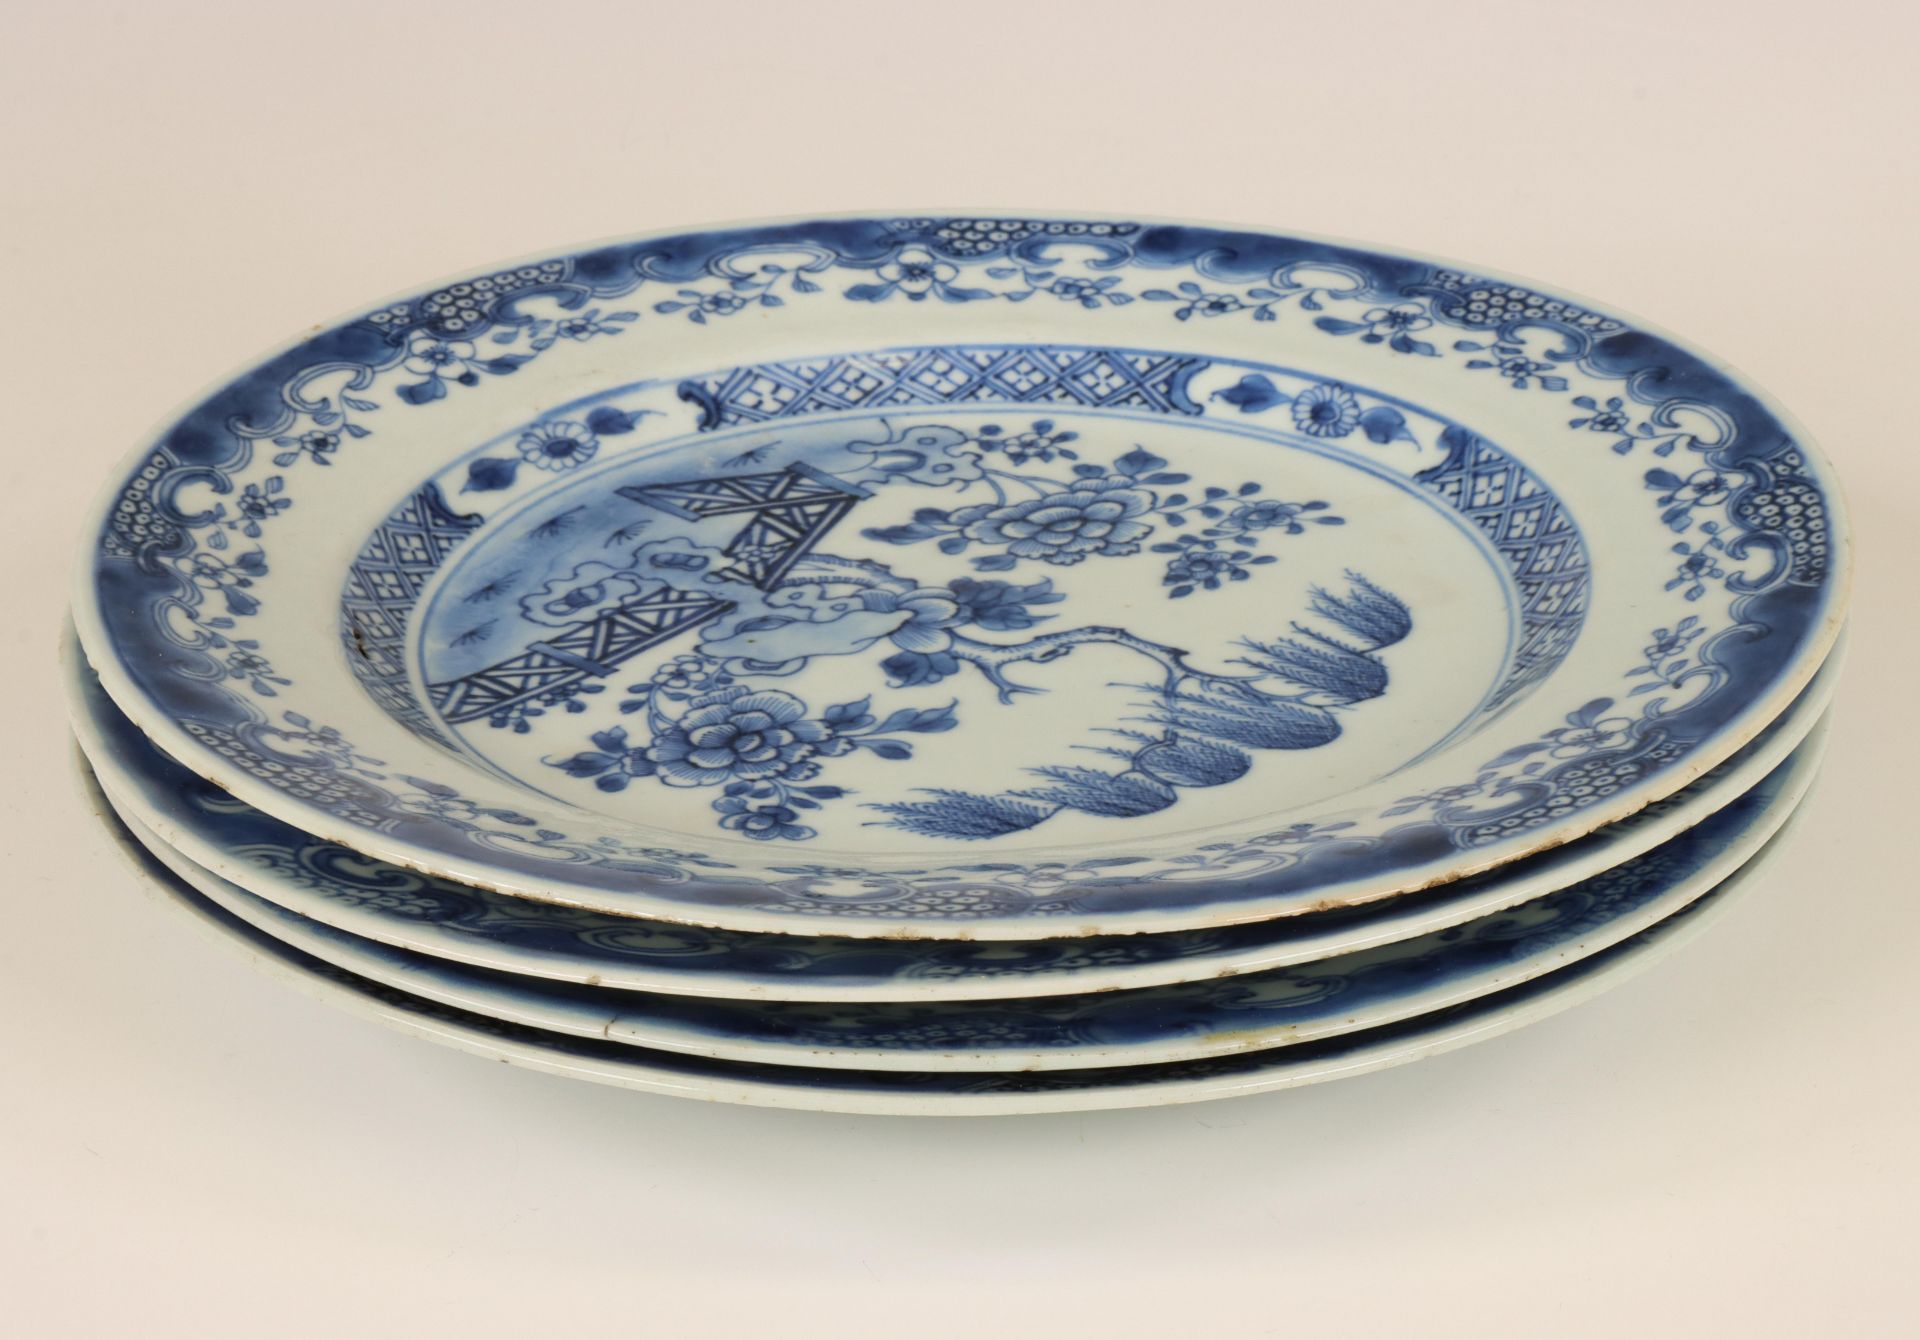 China, a set of four blue and white porcelain plates, Qianlong period (1736-1795), - Image 2 of 2